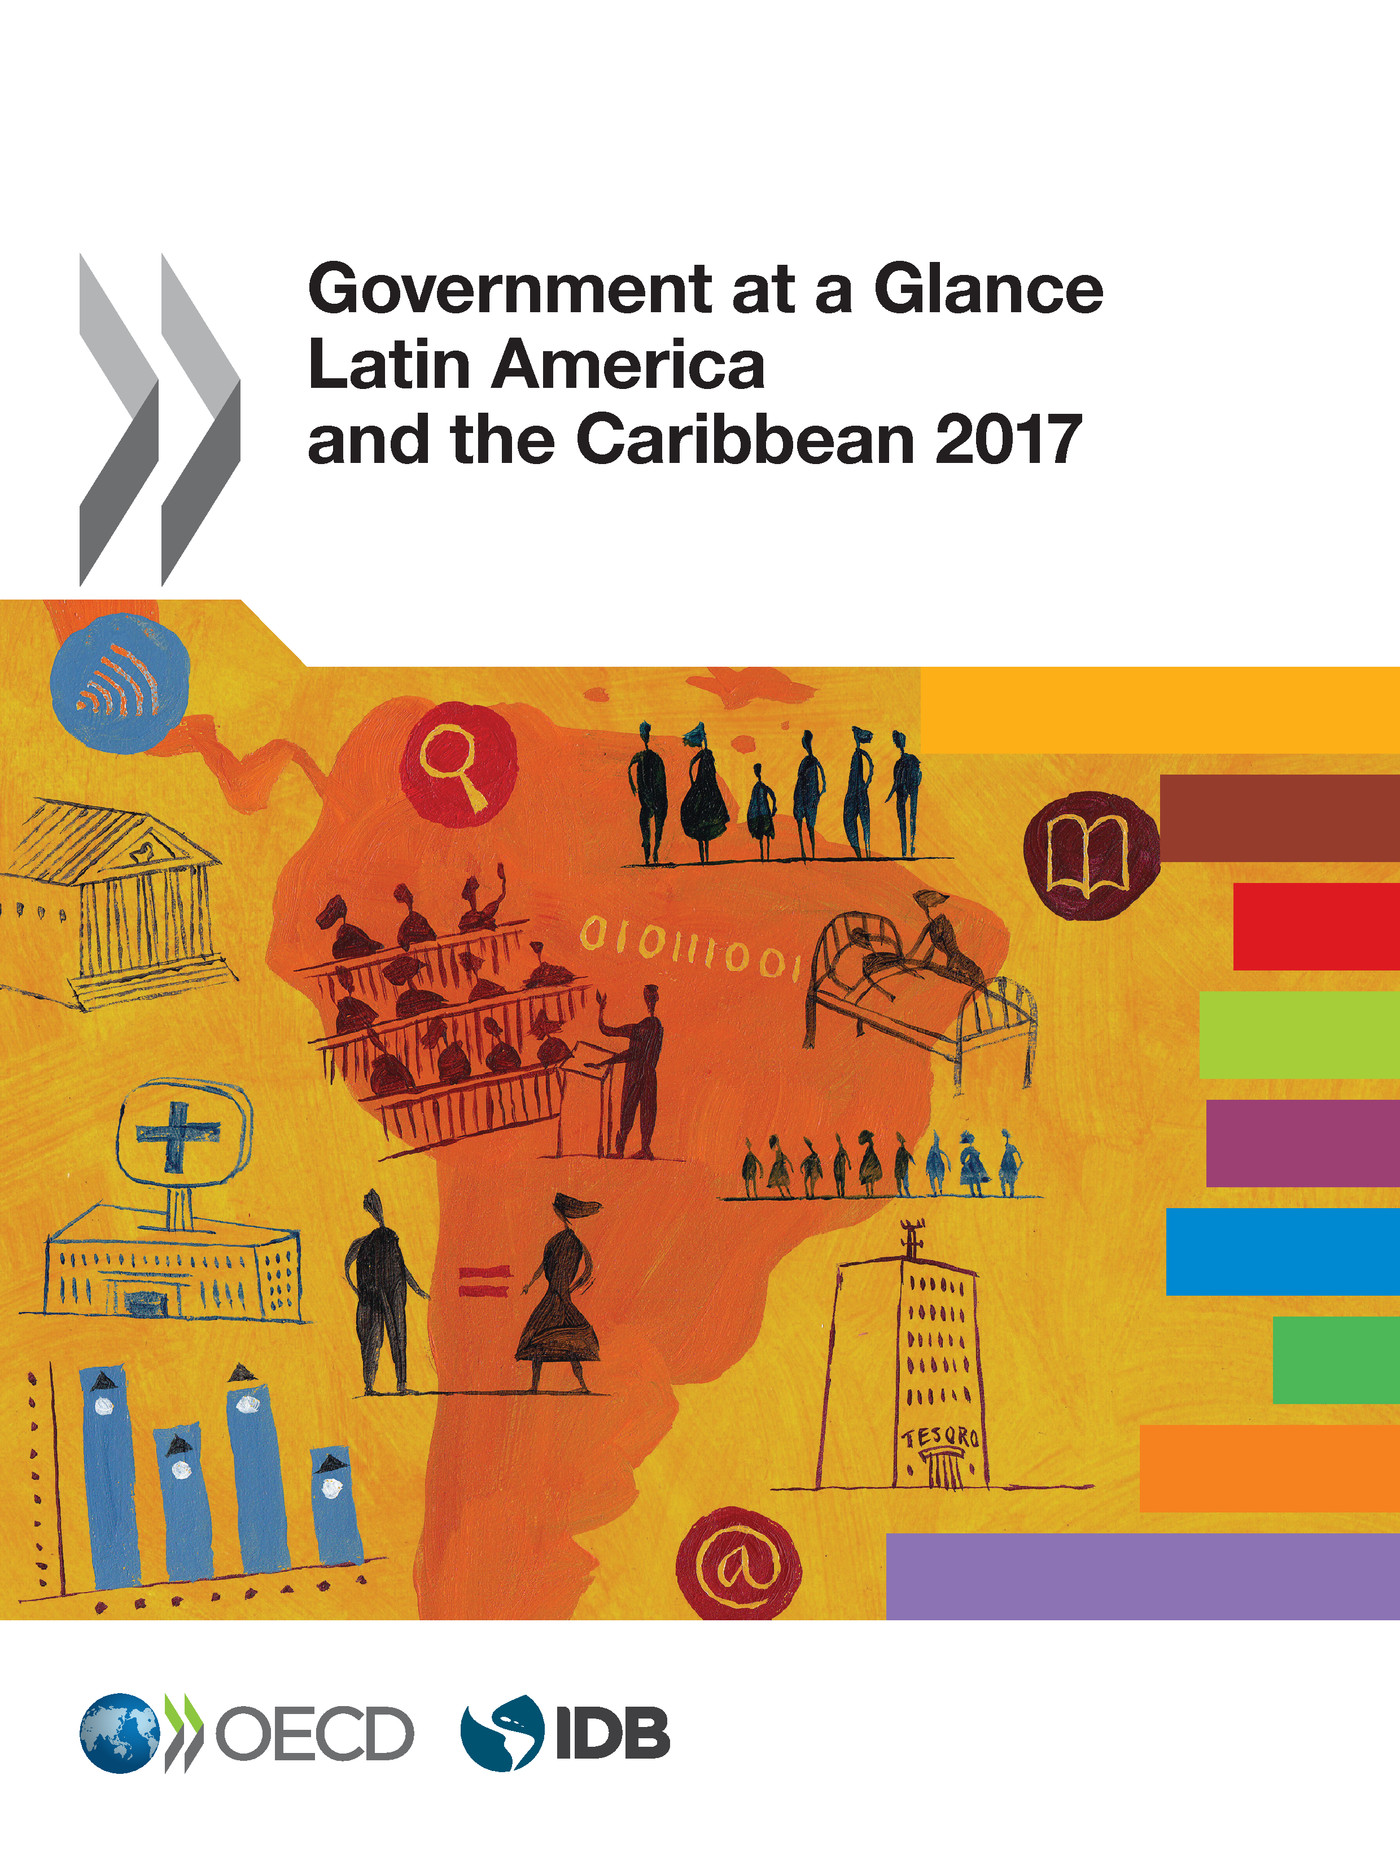 Government at a Glance: Latin America and the Caribbean 2017 -  Collectif - OCDE / OECD